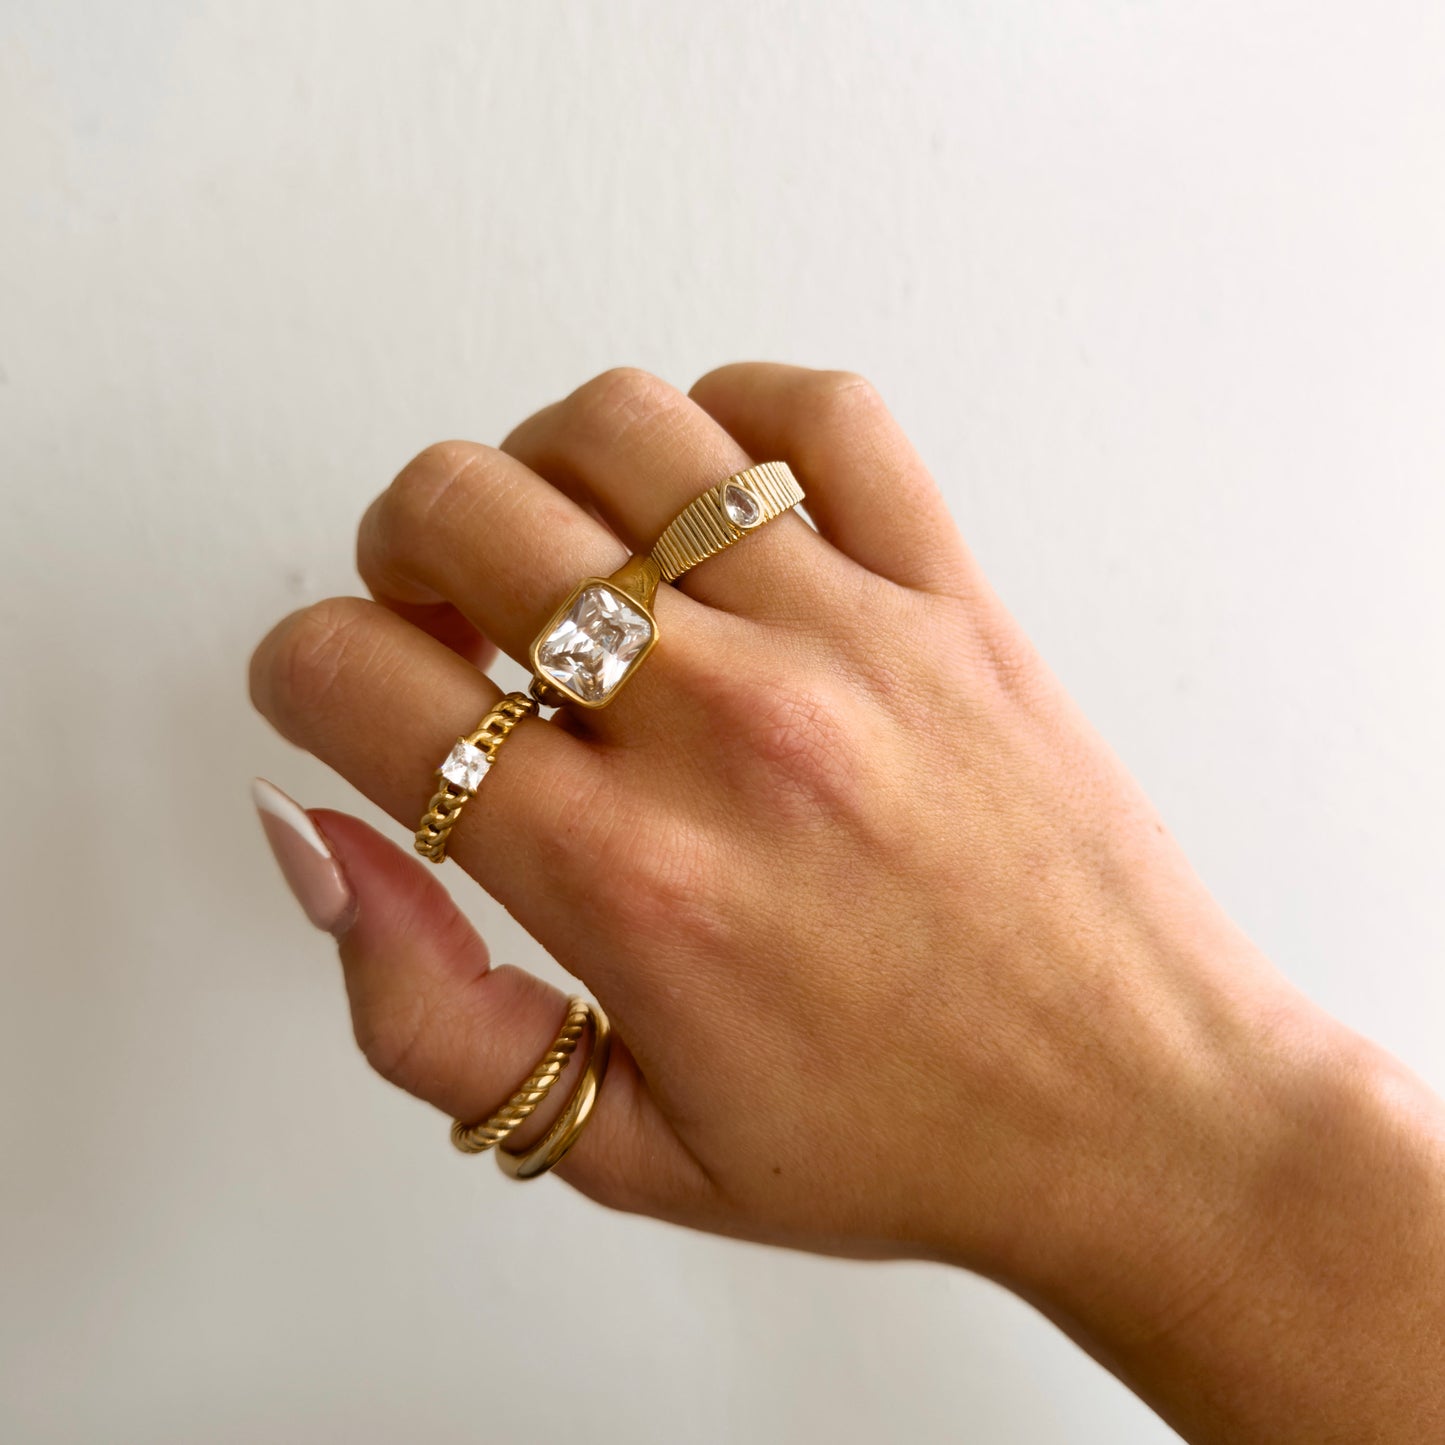 Chunky gold ring, statement ring, bold chunky gold ring, gold filled dome ring for her, diamond statement ring, gift for her, everyday ring